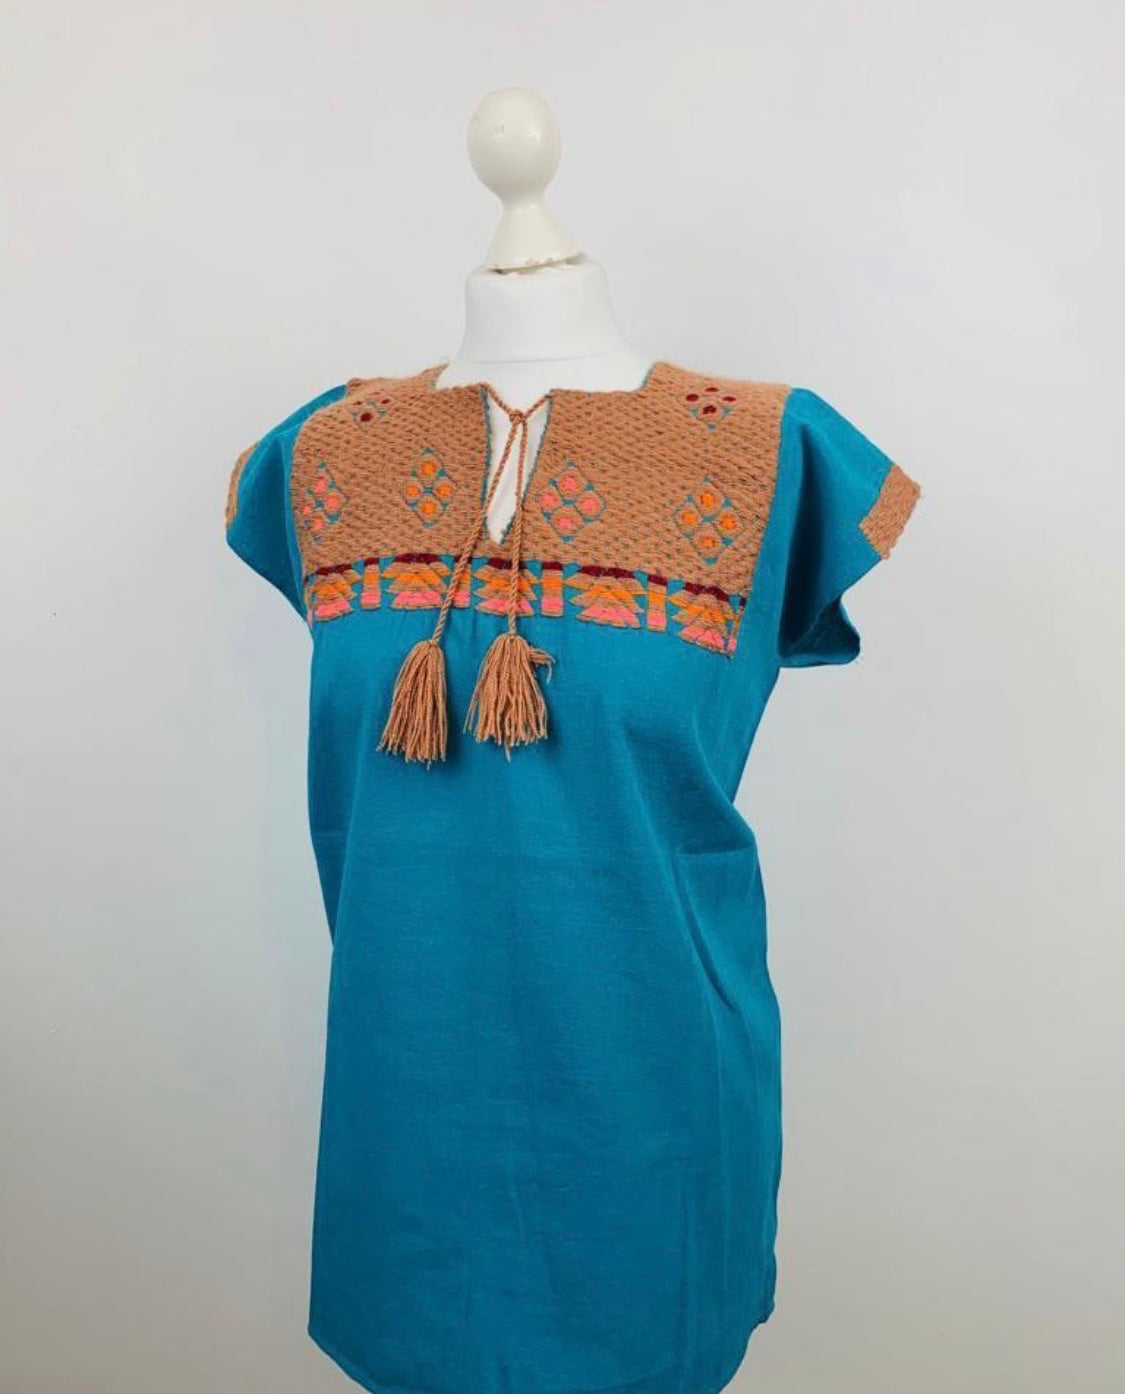 SALE!!! Hand Embroidered Authentic Mexican Top